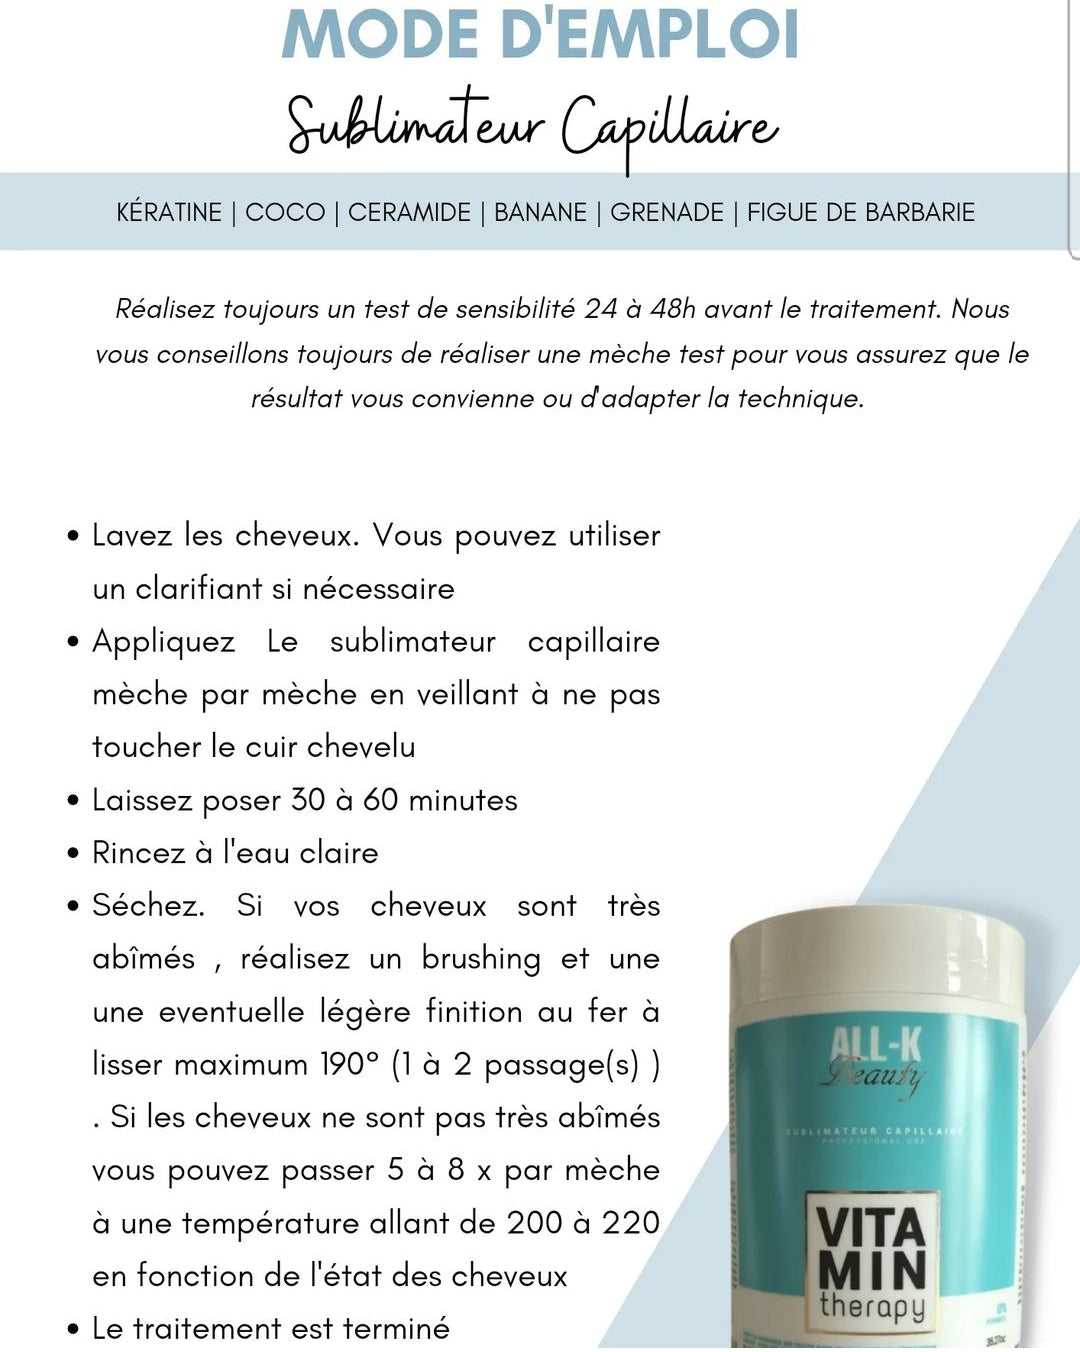 Botox capillaire - Vitamin Therapy -  Sublimateur All-K Beauty